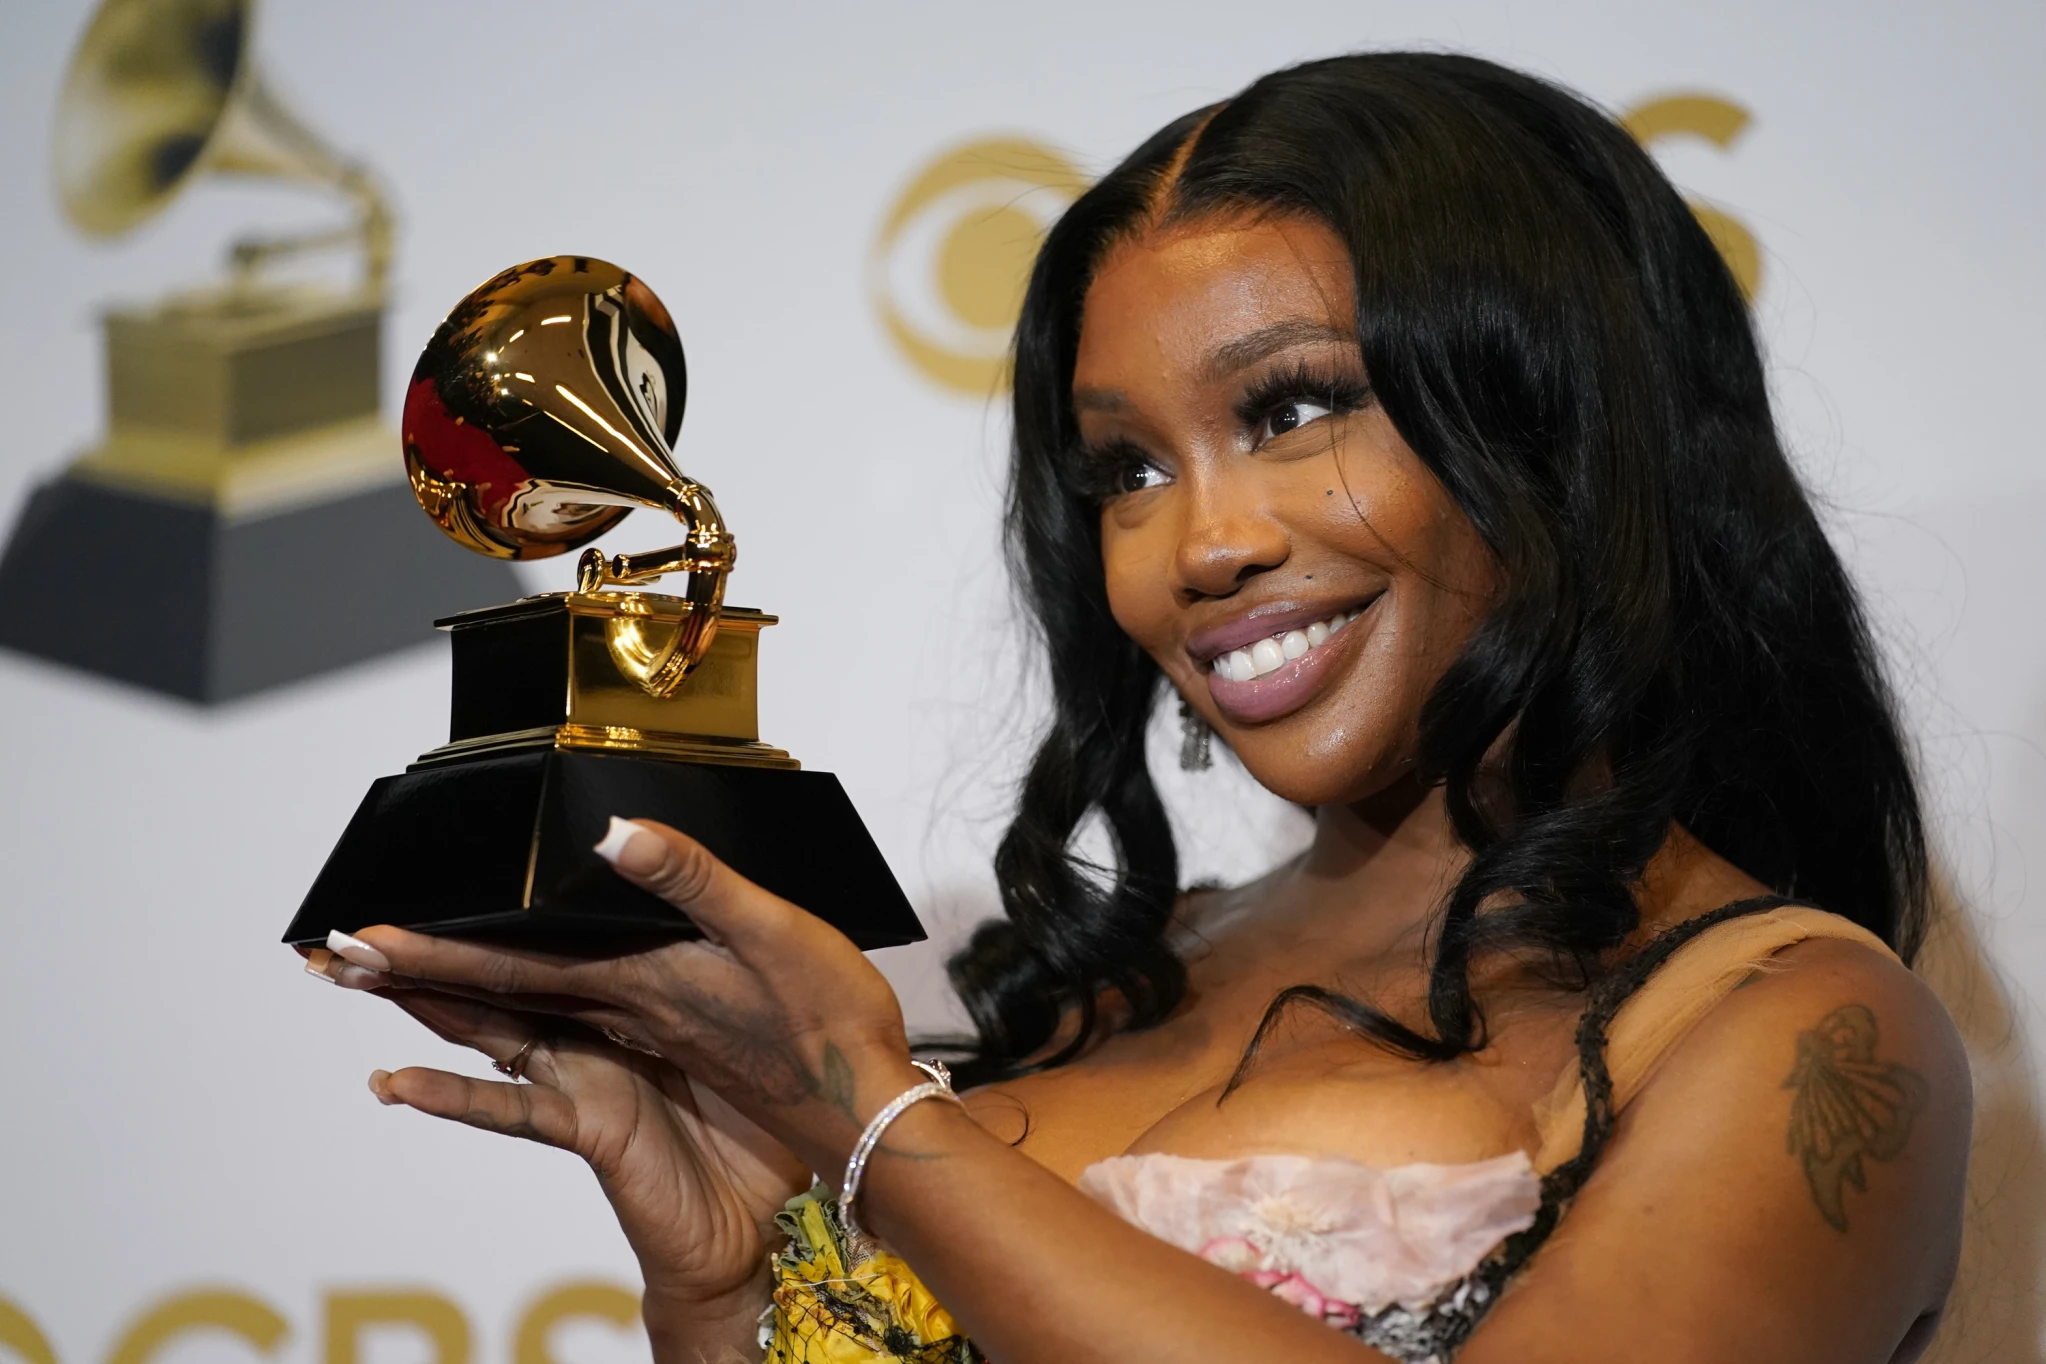 Taylor Swift chases album of the year record but faces stiff competition from R&B artist SZA at female-focused Grammys